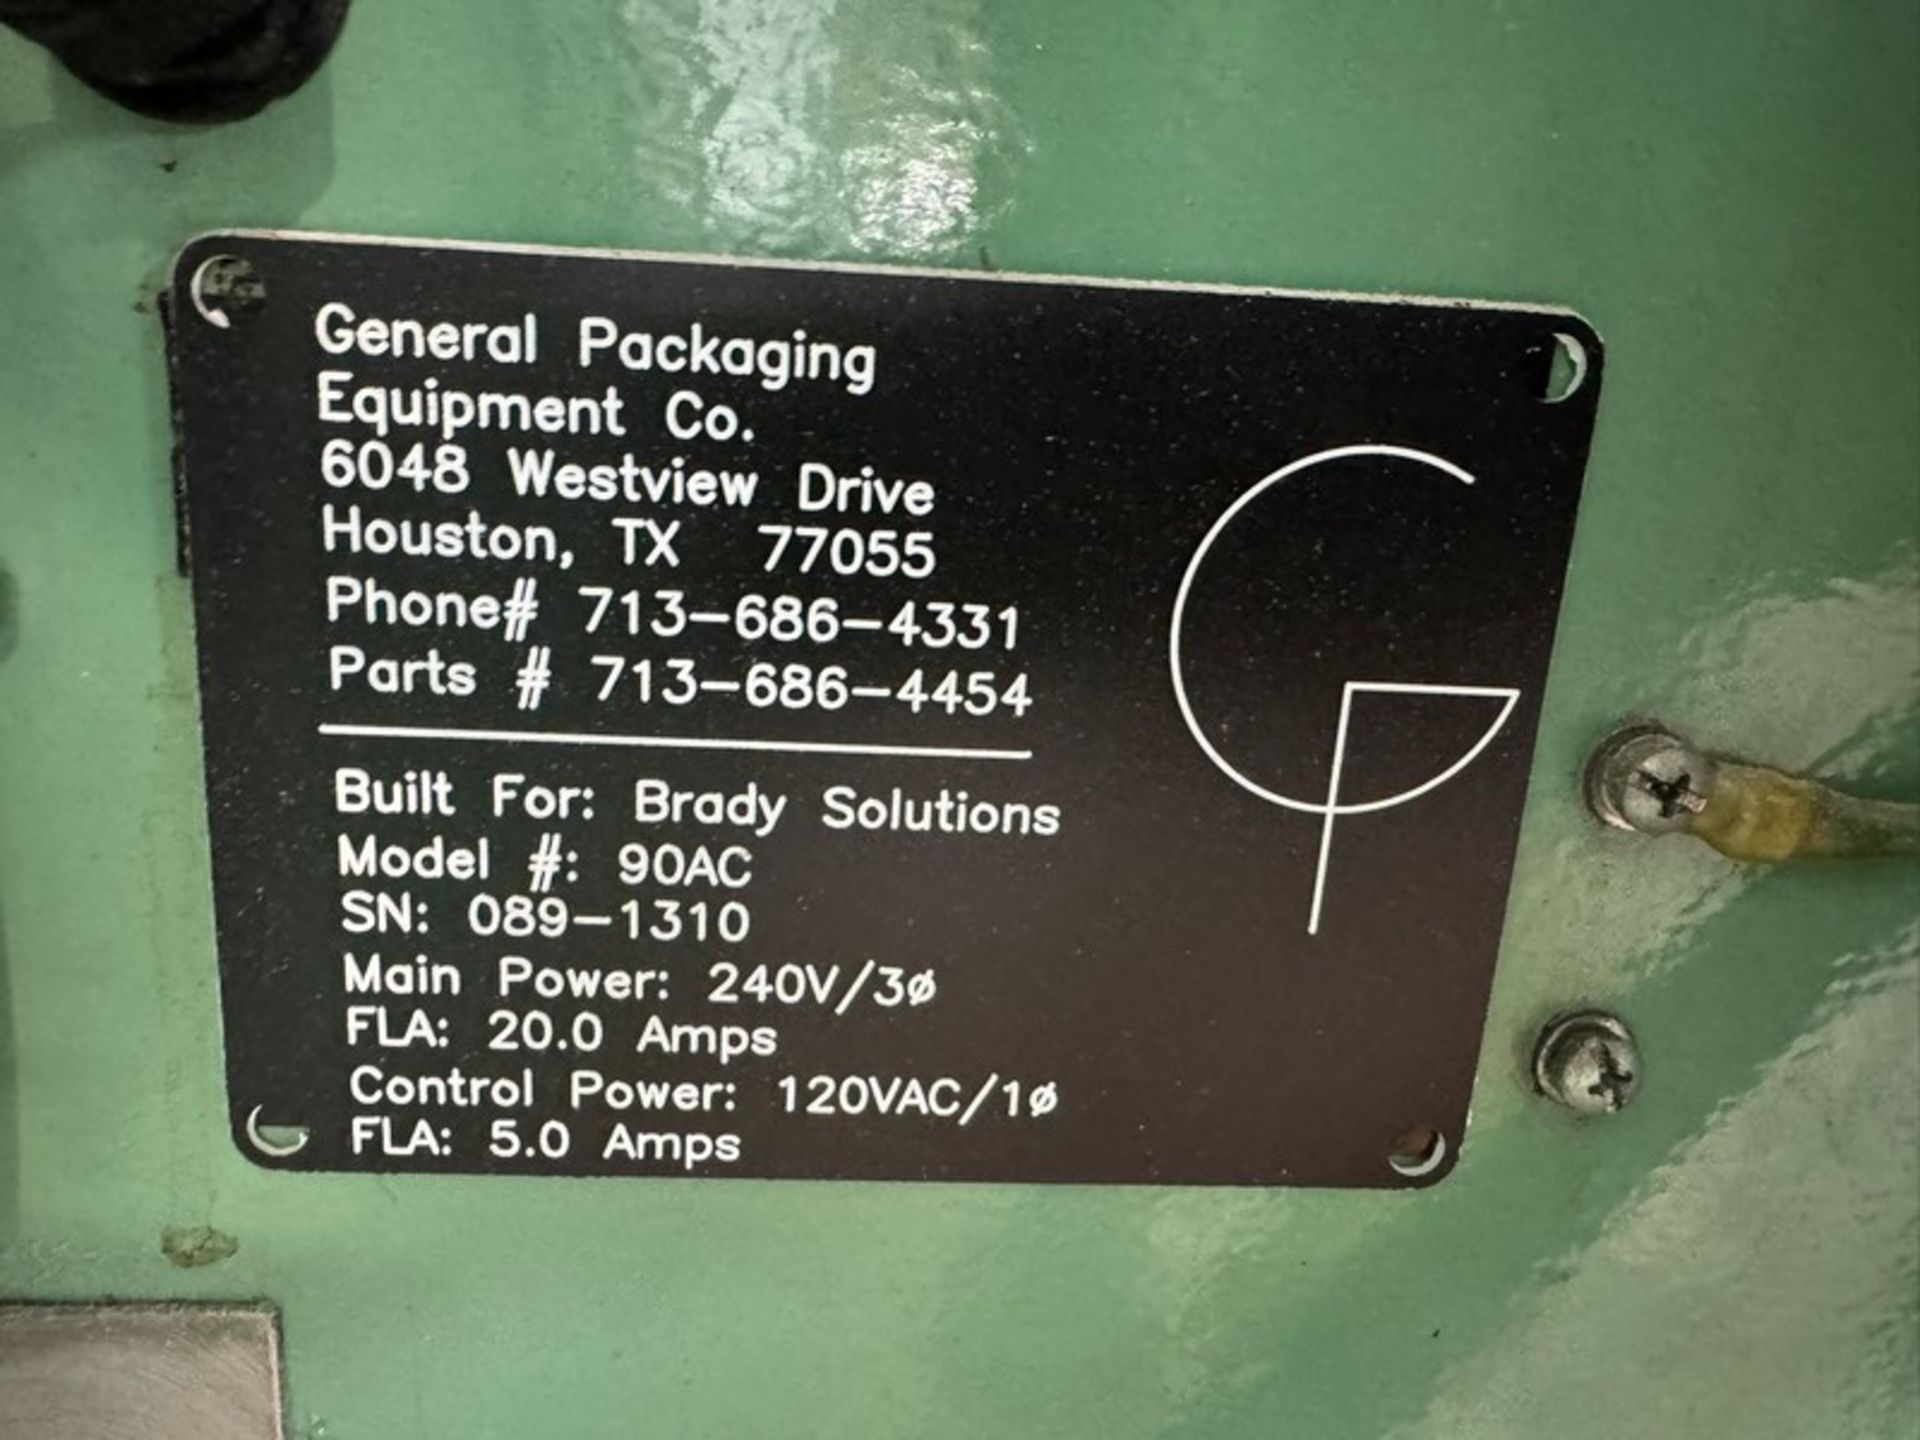 General Packaging Equipment Co. VFFS, M/N 90AC, S/N 089-1310, 240 Volts, 3 Phase (INV#100095) ( - Image 8 of 12